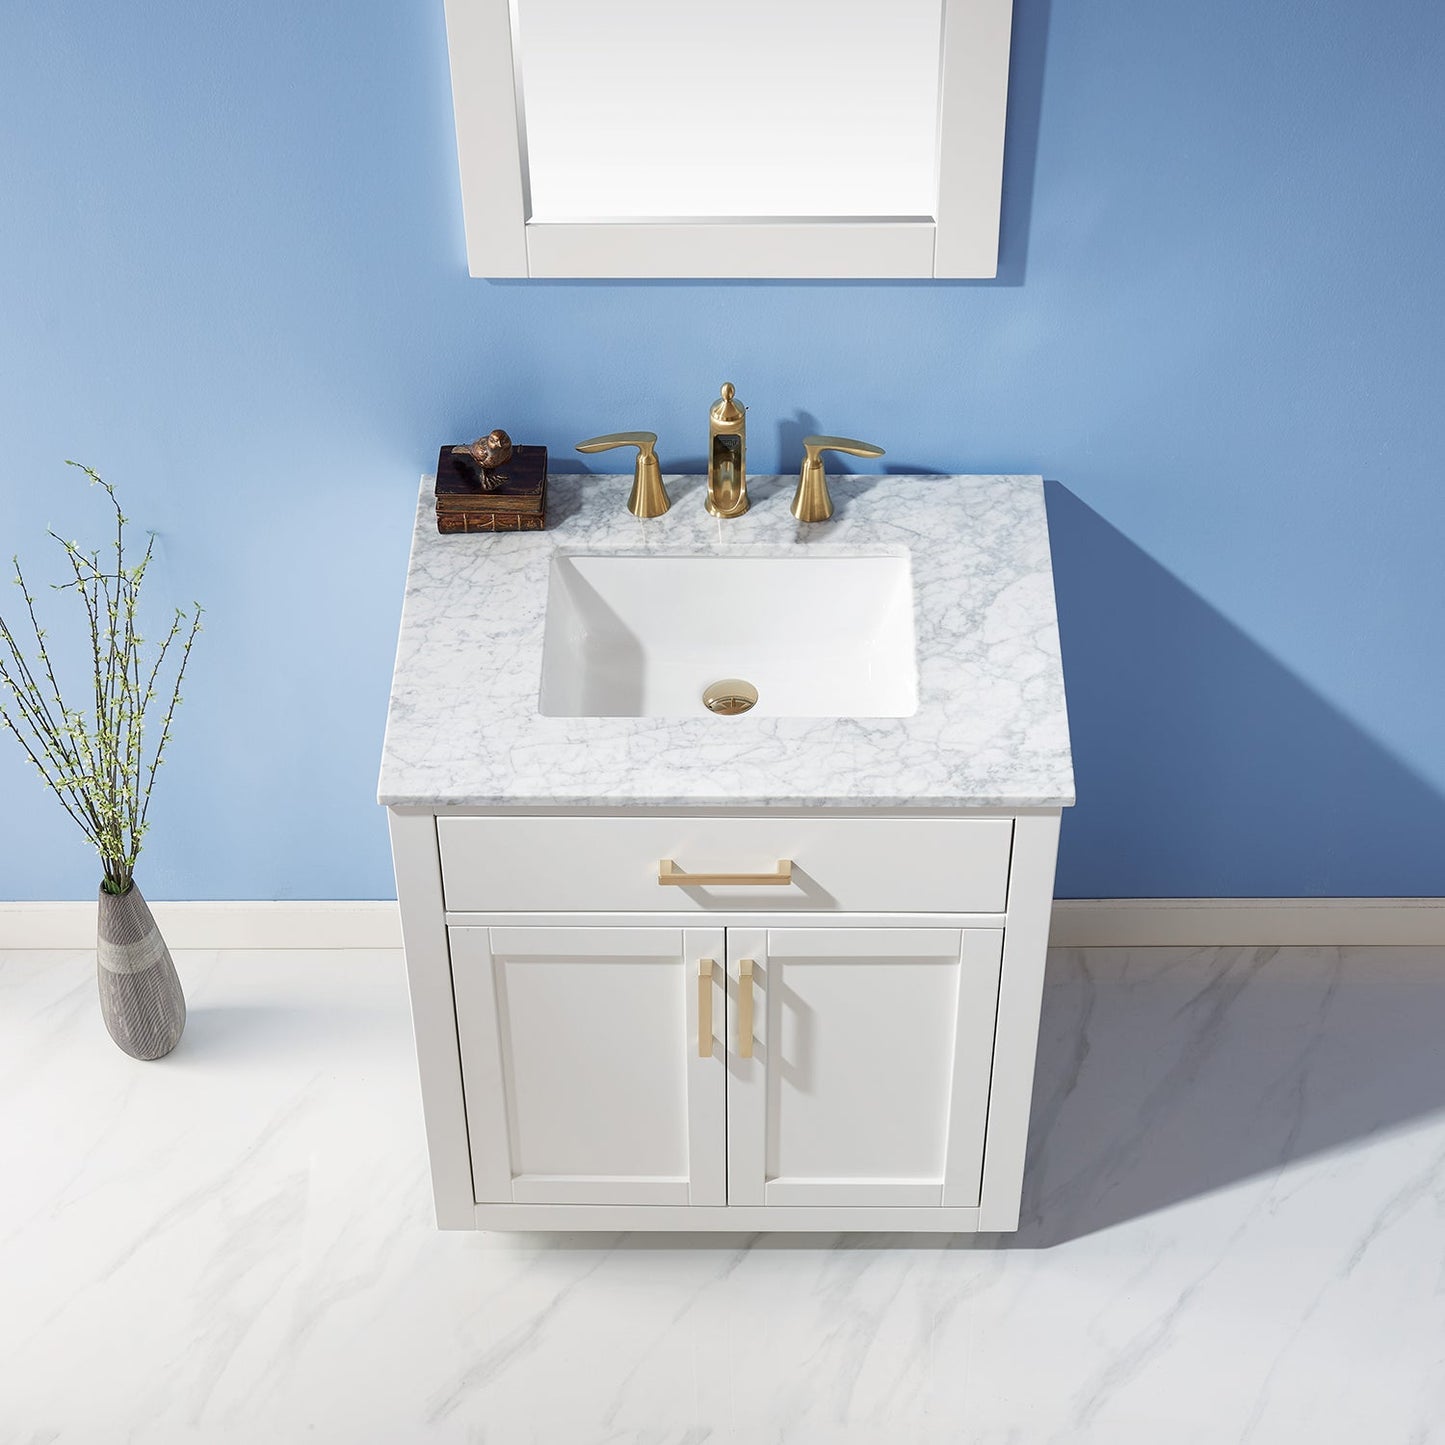 Ivy 30" Single Bathroom Vanity Set in White and Carrara White Marble Countertop with Mirror